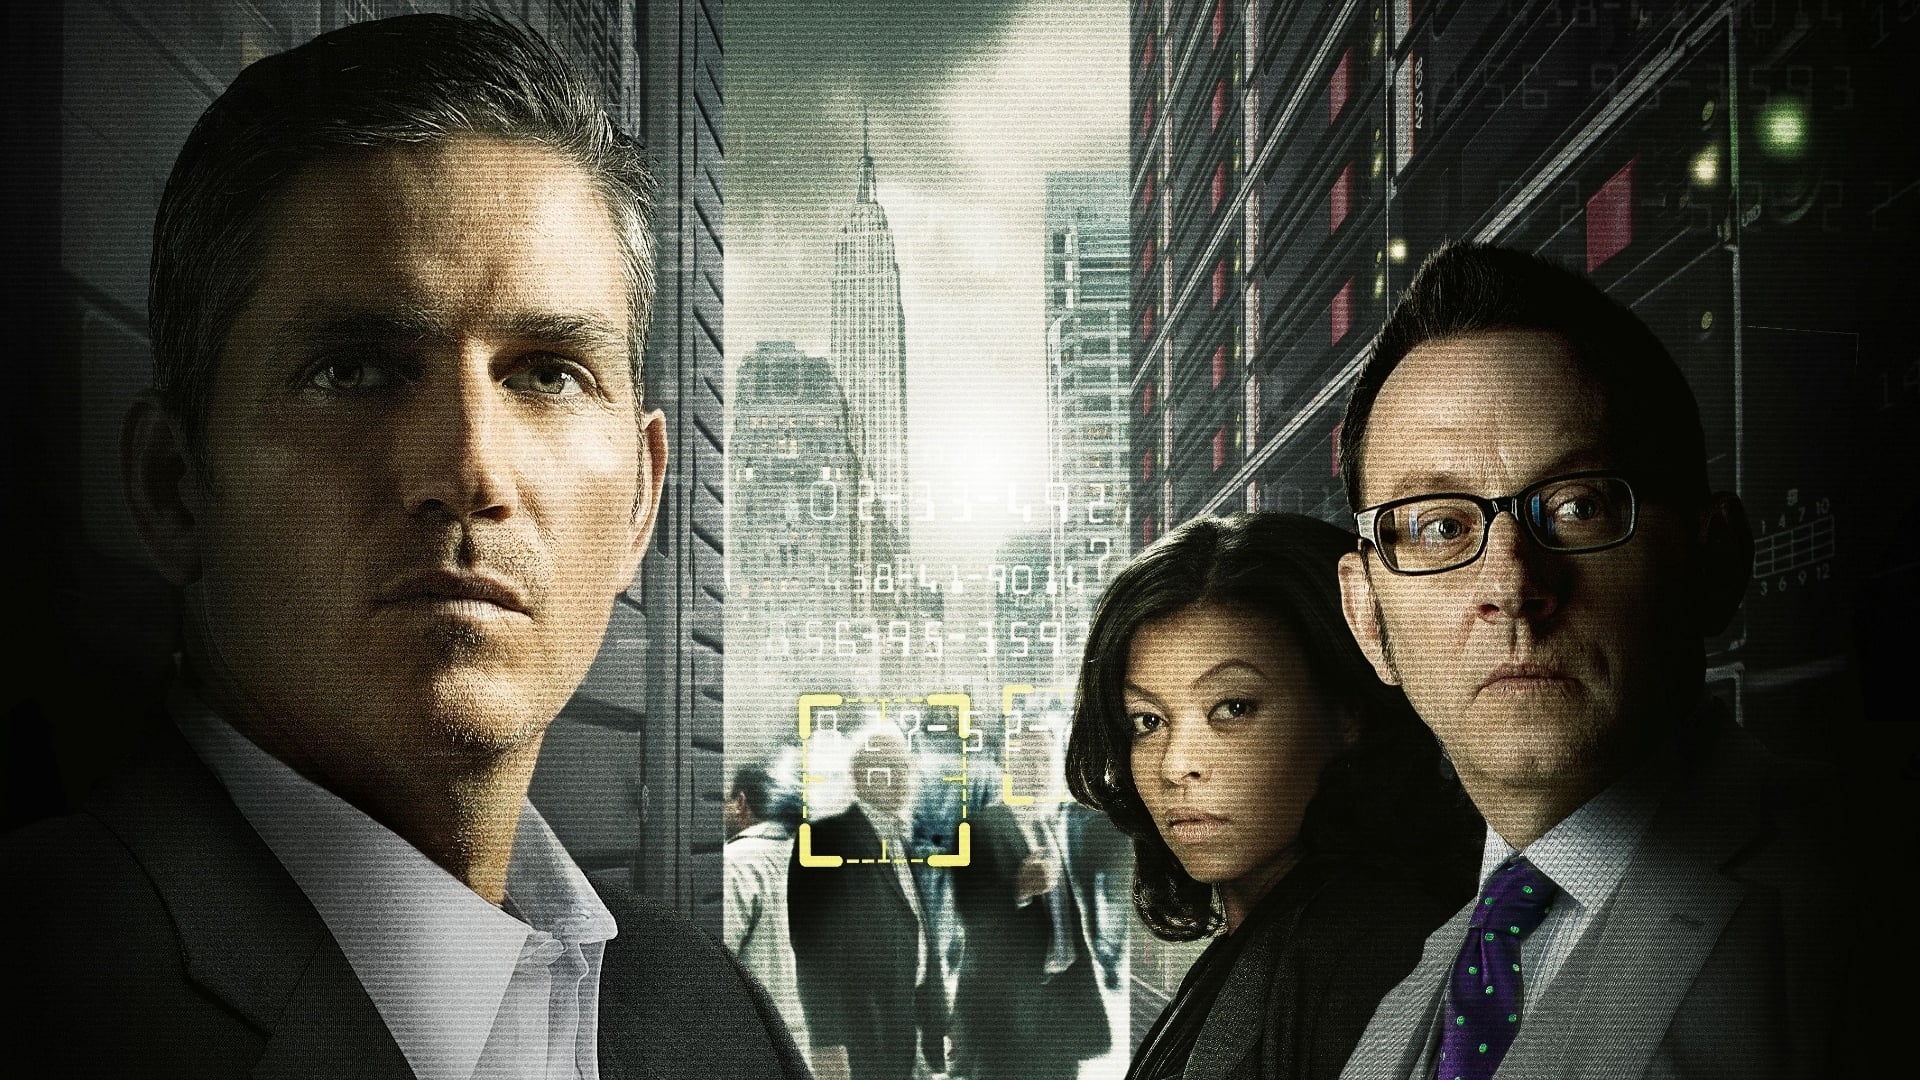 Person of Interest streaming – Cinemay